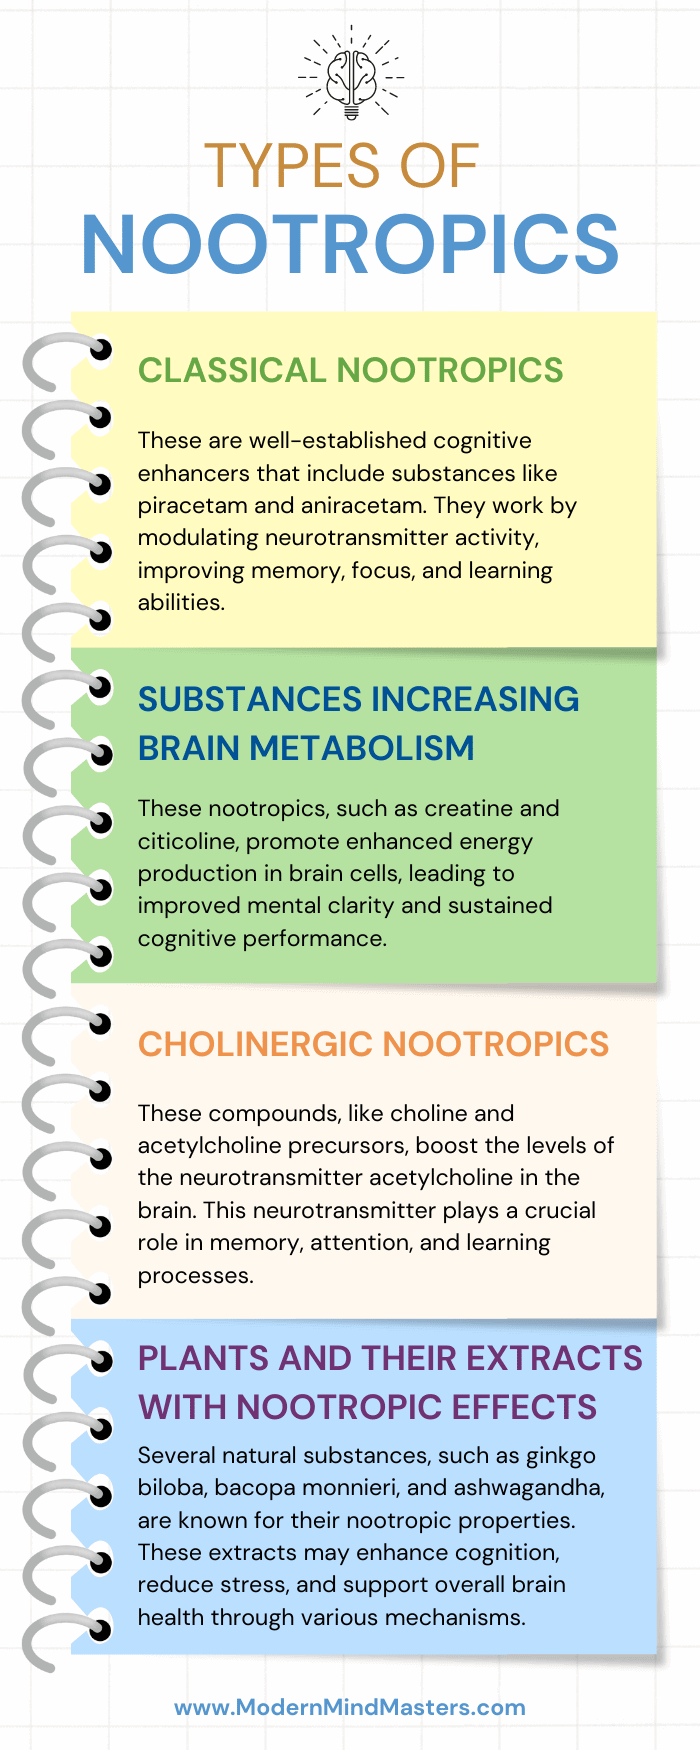 Types of Nootropics: Classical compounds, substances increasing brain metabolism, cholinergic, and plant based.